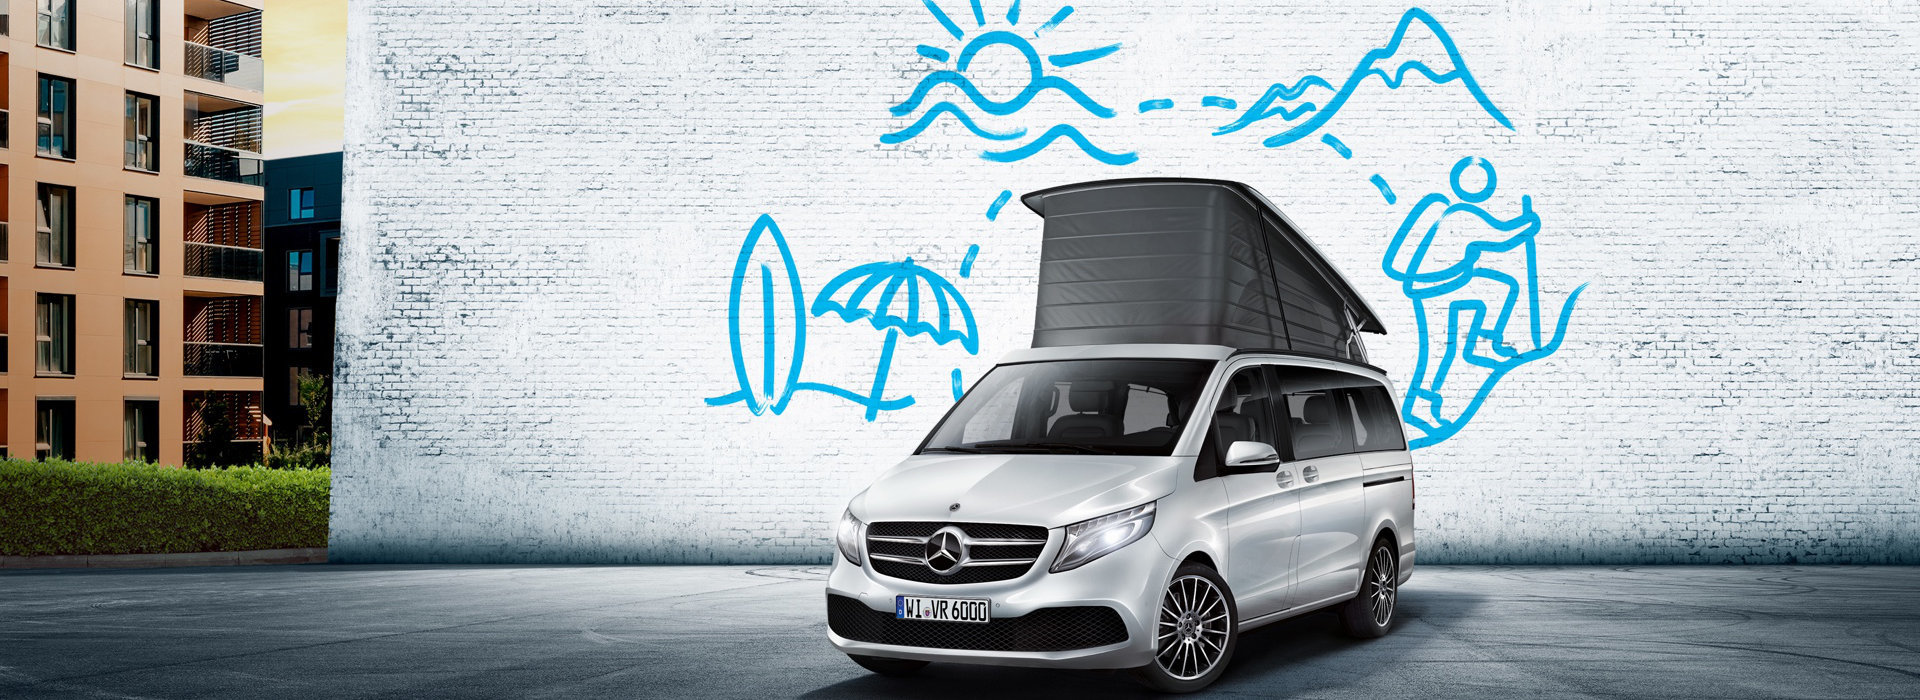 <h2><span class="ATitle-Cond-Reg" style="font-size:36px"><span style="color:#ffffff">Leuchtsterne am Reisehimmel:<br /> die Marco Polo Freizeit- und Reisemobile.</span></span></h2>
<p class="STitle-Regular"><span style="font-size:22px"><span style="color:#ffffff">#SpaceMaximised<br /> <br /> <br /> <a class="btn btn-secondary rounded-0 mb-2" href="t3://page?uid=42">Jetzt Beratungstermin anfragen</a></span></span></p>